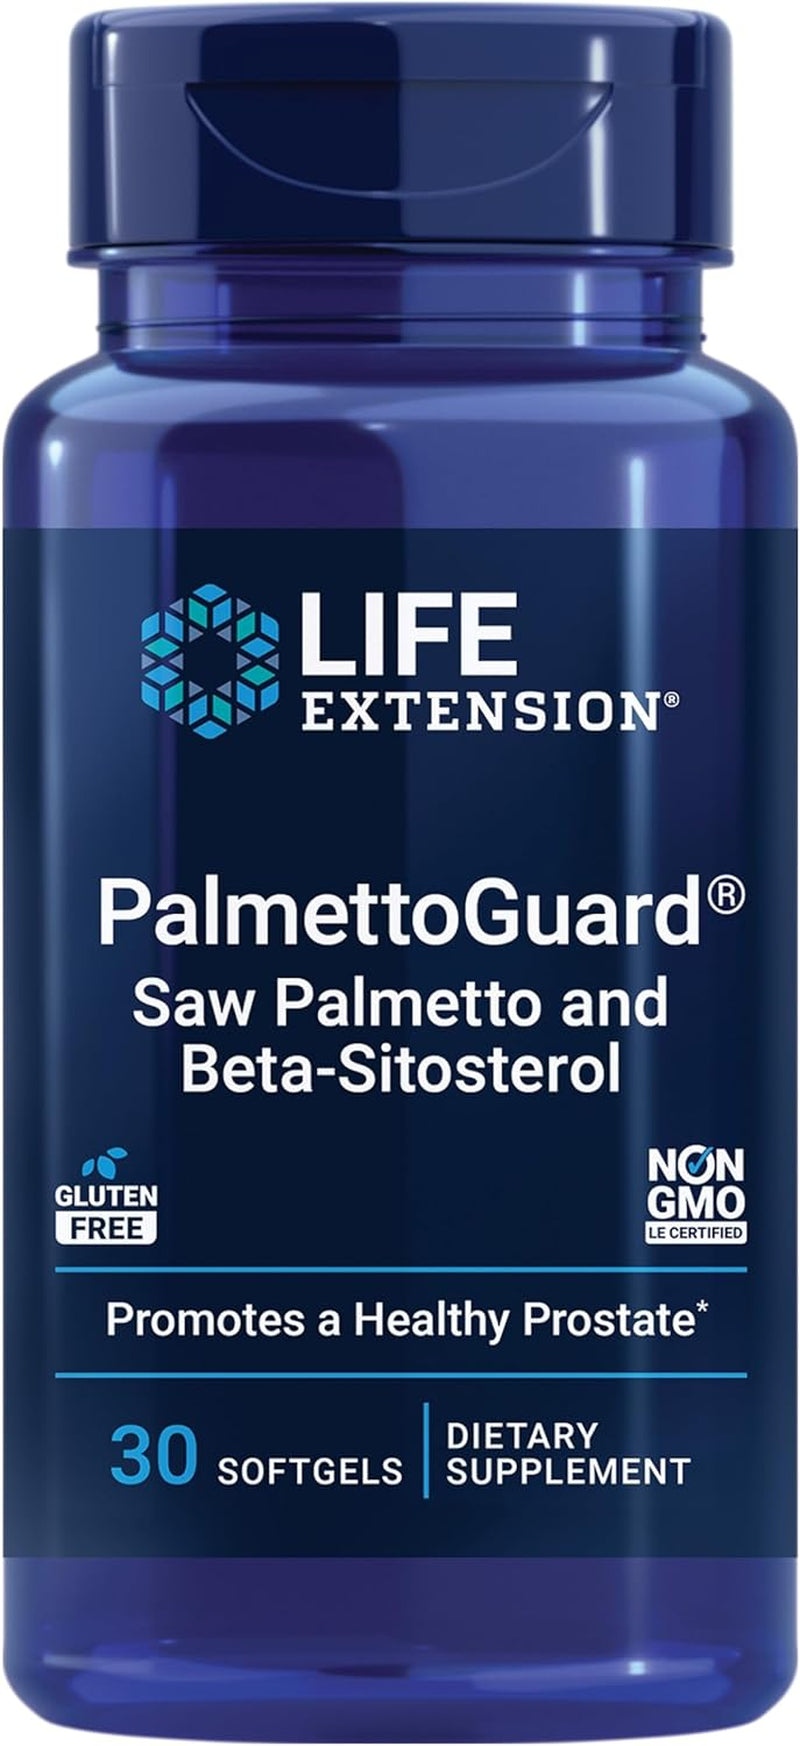 Life Extension Palmettoguard Saw Palmetto & Beta-Sitosterol – Supports Healthy Prostate Function & Hormone Metabolism Health – Supplements for Men - Gluten-Free, Non-Gmo – 30 Softgels